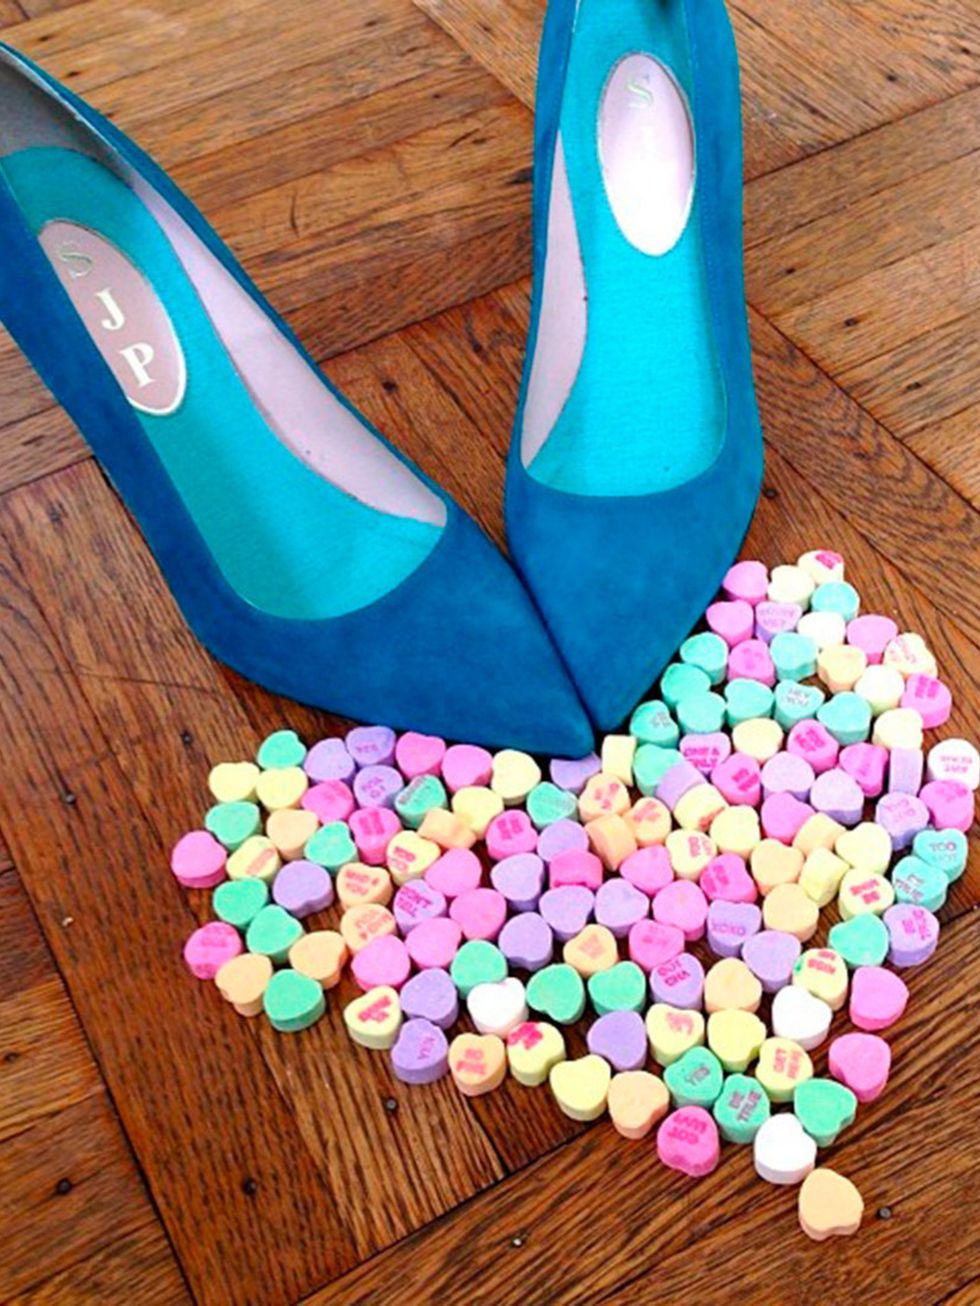 <p>SJP gets arty with her shoes and sweets.</p>